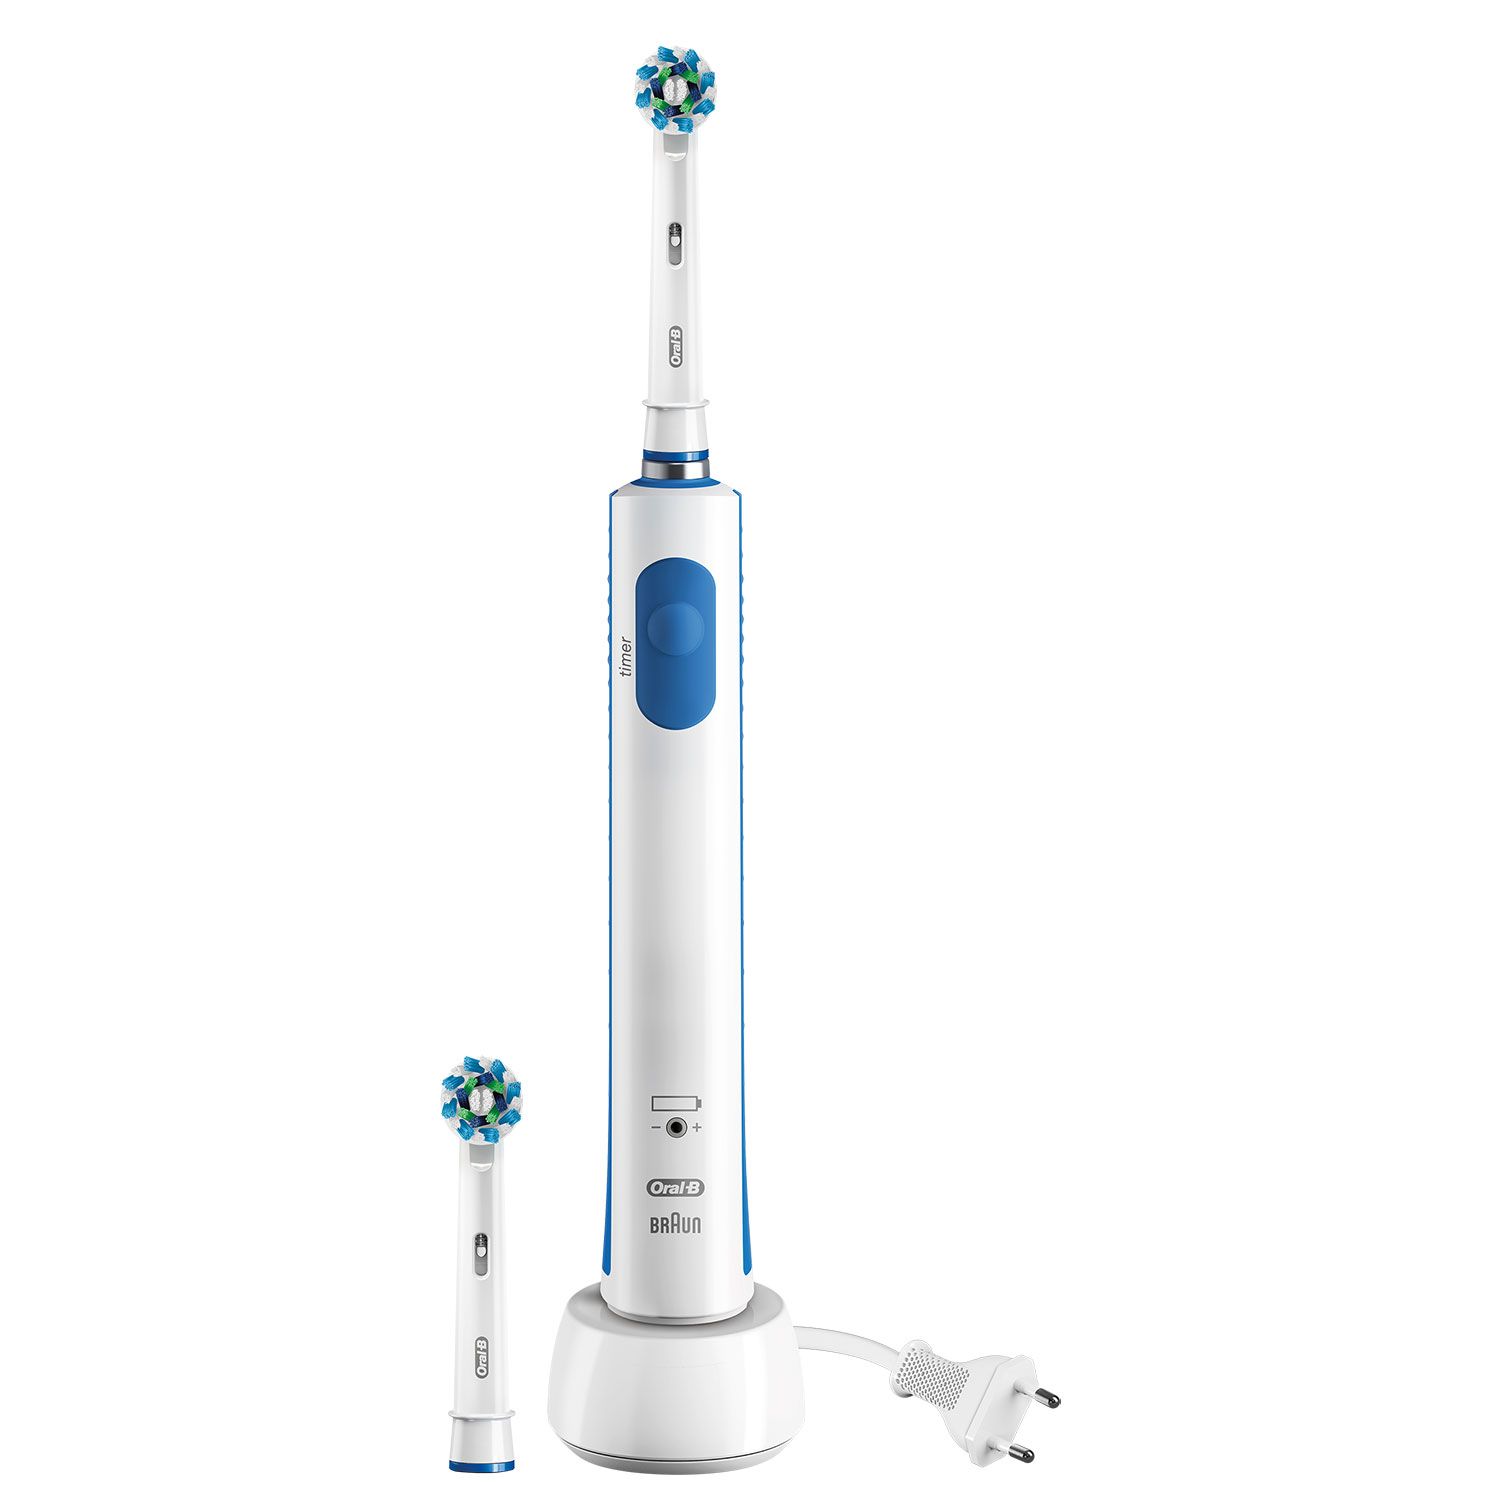 Oral B Pro 570 Cross Action Limited Edition Brush and Refill

Tired of manual toothbrushes? Switch to an Oral-B Pro 2000 Cross Action Electric Toothbrush for a faster, more thorough clean. The professionally inspired design of the cross action toothbrush head surrounds each tooth with bristles angled at 16 degrees, and 3D cleaning action oscillates, rotates, and pulsates to break up and remove up to 100 percent plaque than a regular manual toothbrush. It provides a clinically proven superior clean versus a regular manual toothbrush. The Visible Pressure Sensor lights up if you brush too hard to prevent harmful over-brushing and there are two modes - daily clean and gum care. Used by dentists worldwide, it is compatible with the following replacement toothbrush heads: CrossAction, 3D White, Sensitive Clean, Precision Clean, Floss Action, Trizone and Dual Clean.

Key Features:

    Comes with 3D cleaning action that easily adapts to your teeth.
    Pressure sensor lights up to alert when the user is brushing too hard.
    Removes up to 100% more plaque than a regular manual toothbrush.
    Buzzes every 30 seconds to focus on brushing the next quadrant of your mouth.
    Alerts user when brushed for the dentist-recommended time of 2 minutes.
    Offers a variety of replacement toothbrush heads to fit different oral health needs.
    Fully charged electric toothbrush lasts for up to 7 days with regular use.


How to use : 

    Step 1: Make sure your toothbrush is charged.
    Step 2: Start with the outside surfaces of the teeth. Guide the brush head slowly from tooth to tooth, holding the brush head in place for a few seconds against each tooth before moving on to the next one. Follow along with the shape of each tooth and the curve of the gums.
    Step 3: Repeat Step 2 on the inside surfaces of the teeth.
    Step 4: Repeat Step 2 on the chewing surfaces of the teeth as well as behind the back teeth.
    Step 5: Direct the brush head along the gum line and upon the gums. Again, do not press hard or scrub.
    Step 6: Try grazing the brush head along your tongue and the roof of your mouth, back to front, to help freshen your breath.